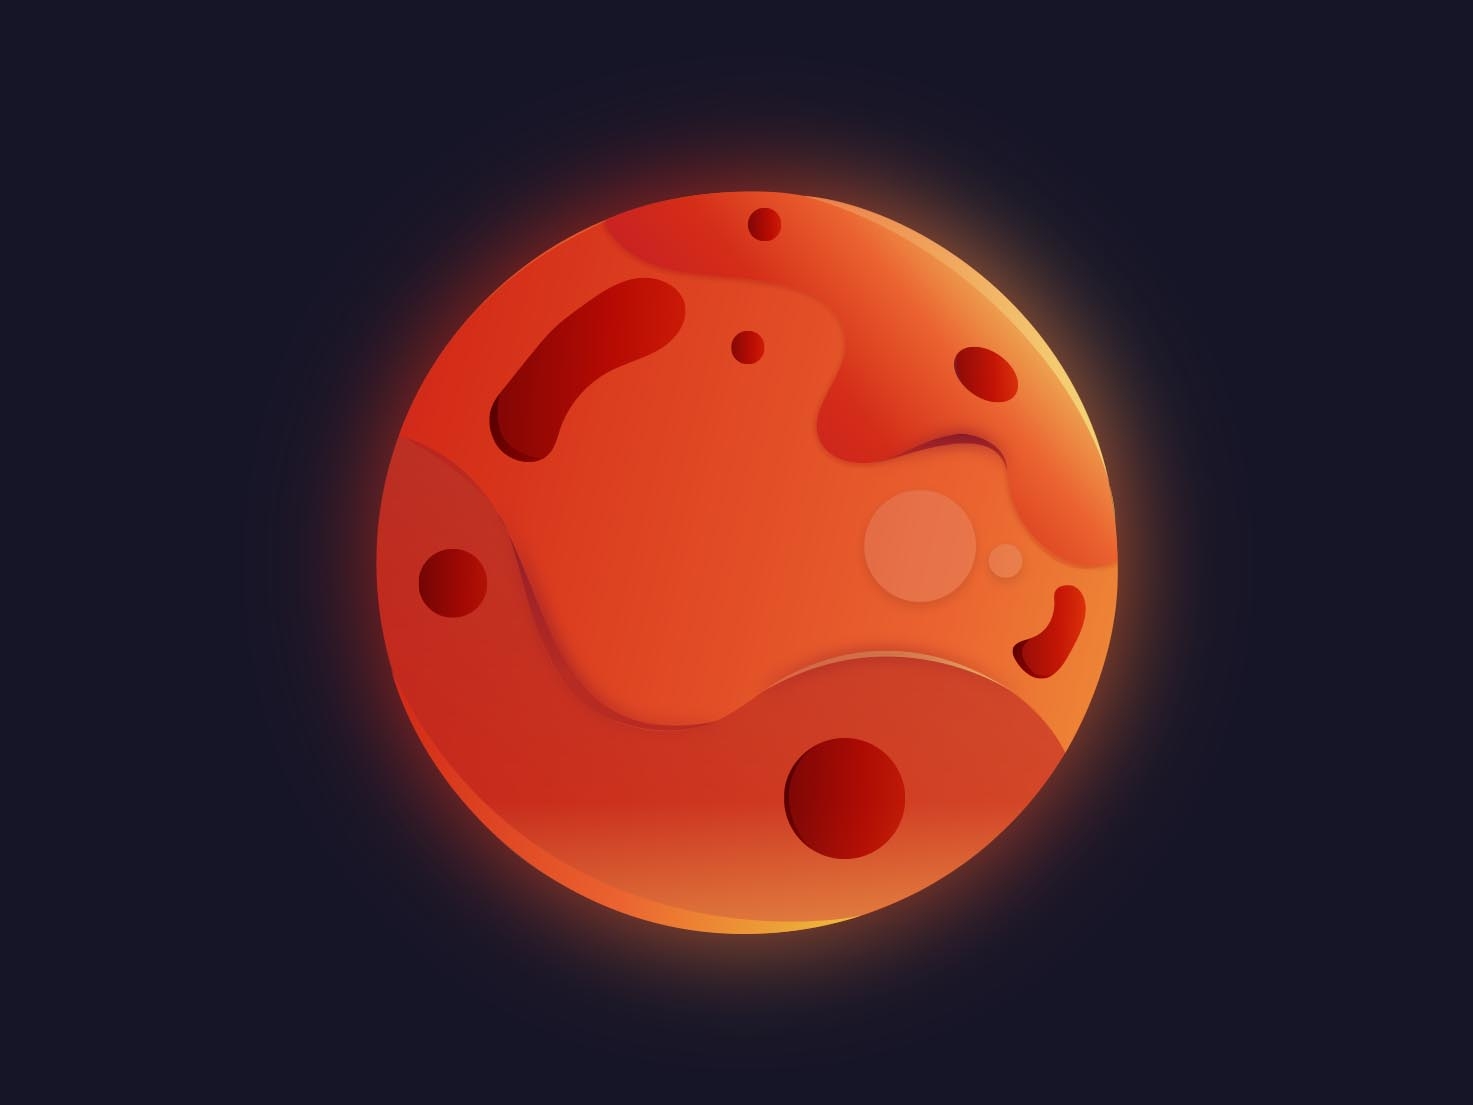 Mars by Eleven on Dribbble